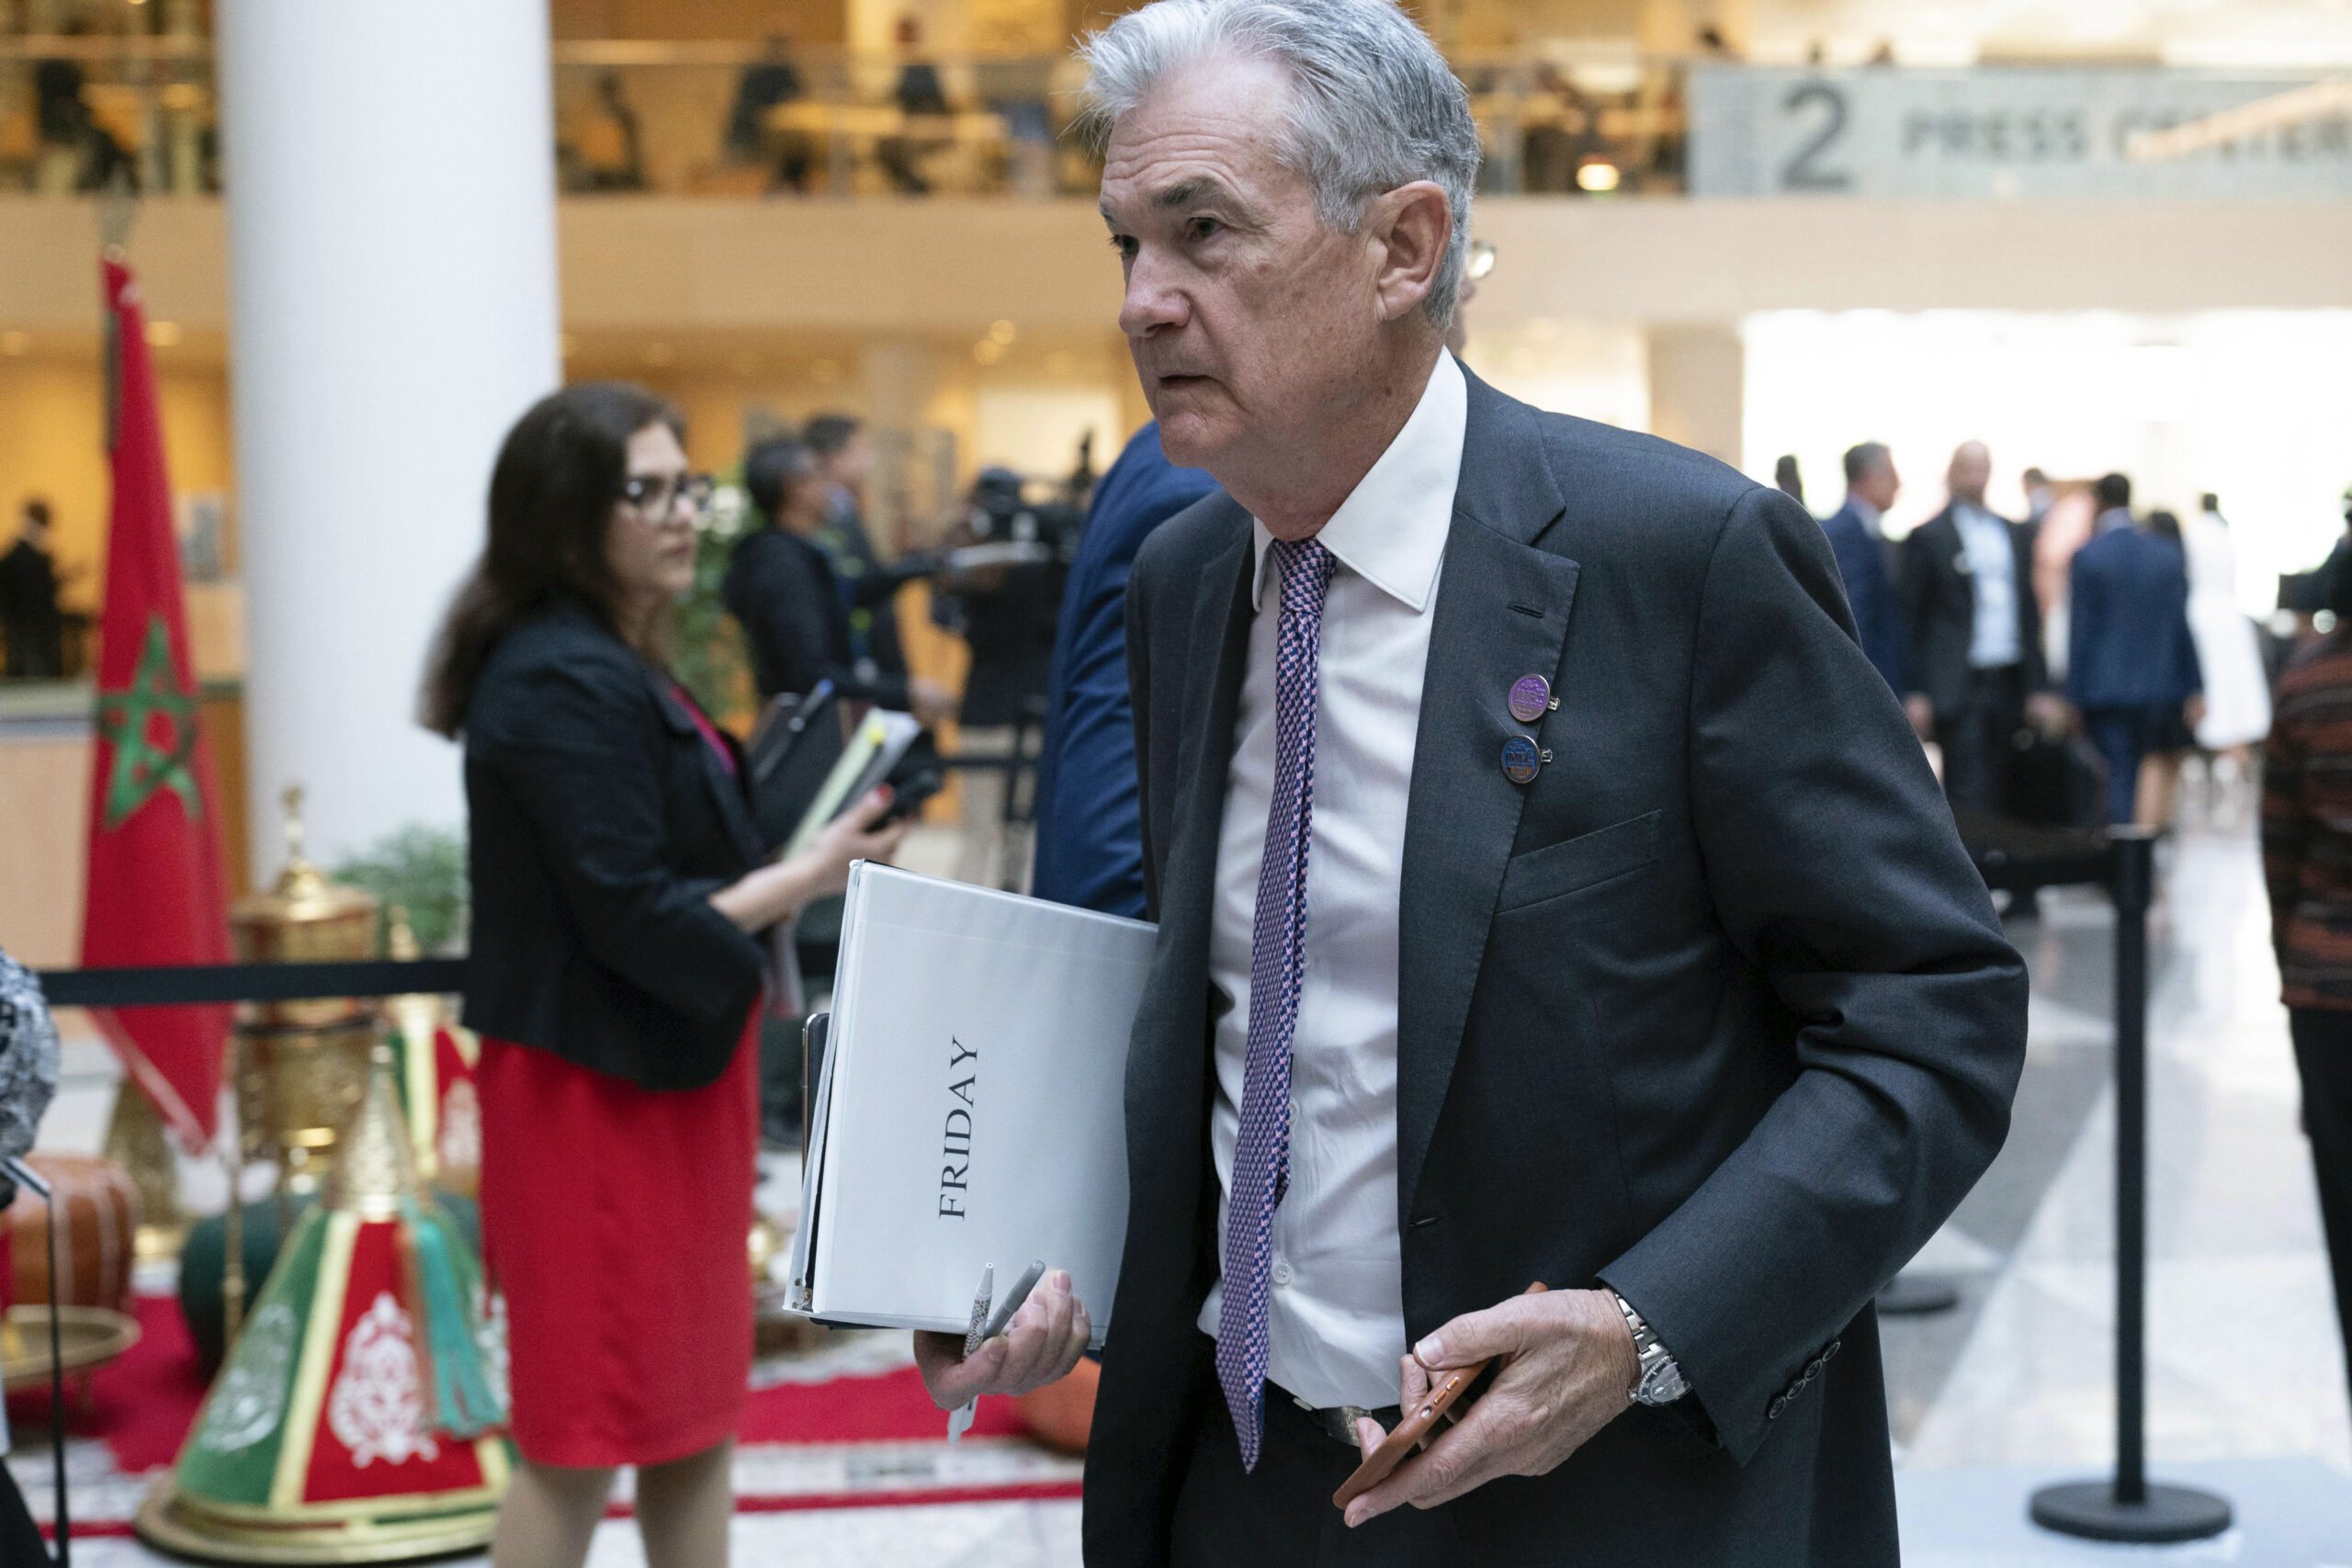 Federal Reserve Chairman Jerome Powell arrives for the plenary of the International Monetary and Fi...